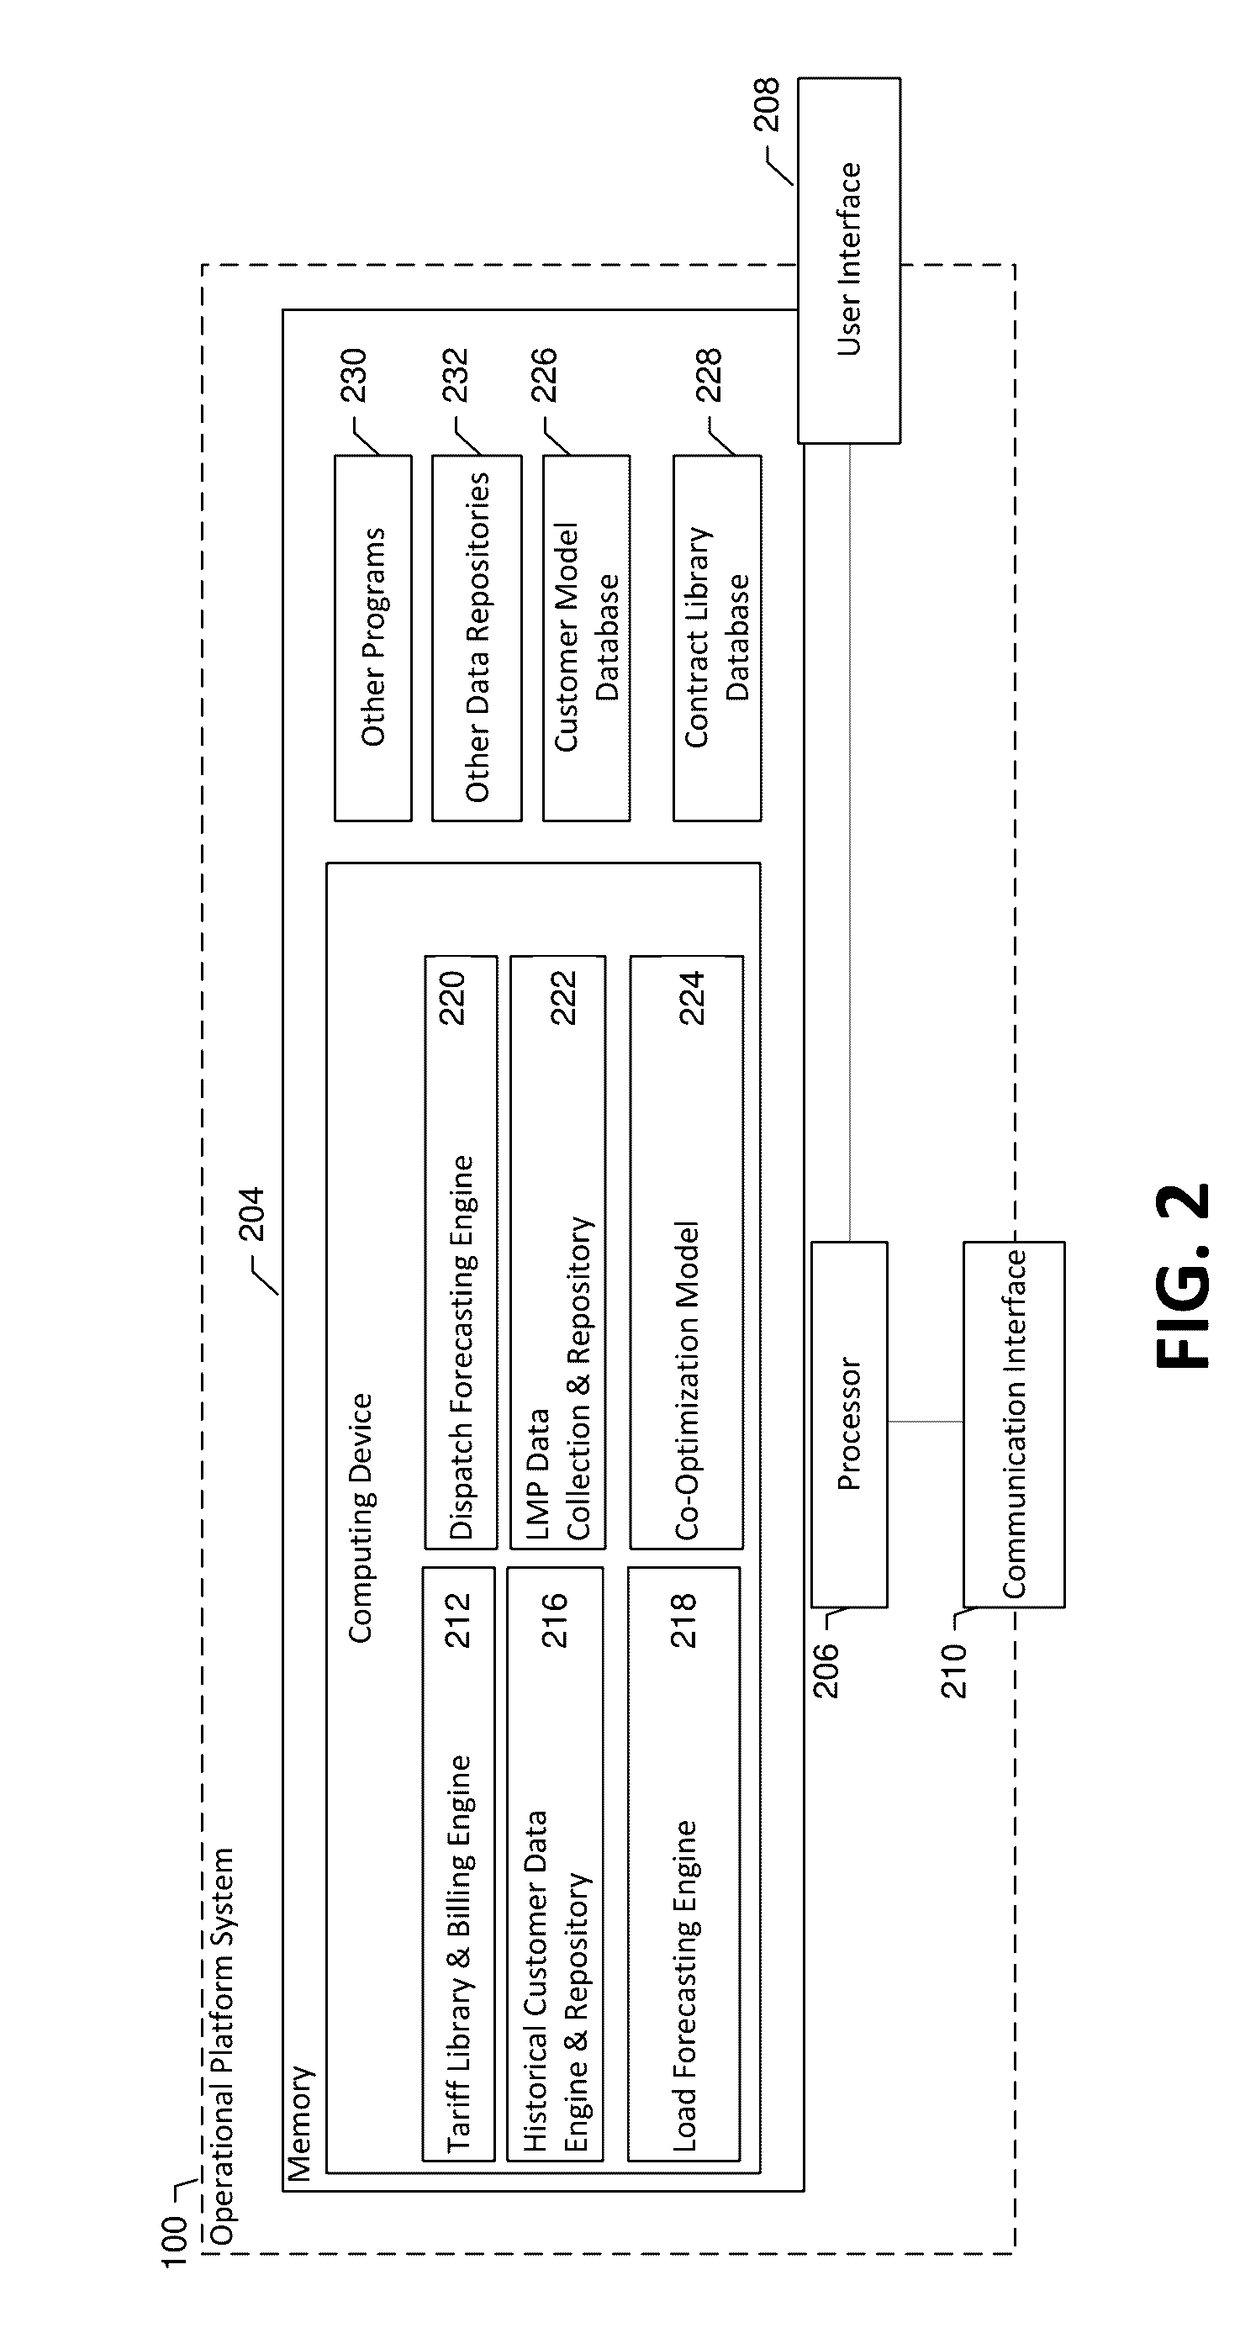 Method and apparatus for facilitating the operation of an on-site energy storage system to co-optimize battery dispatch